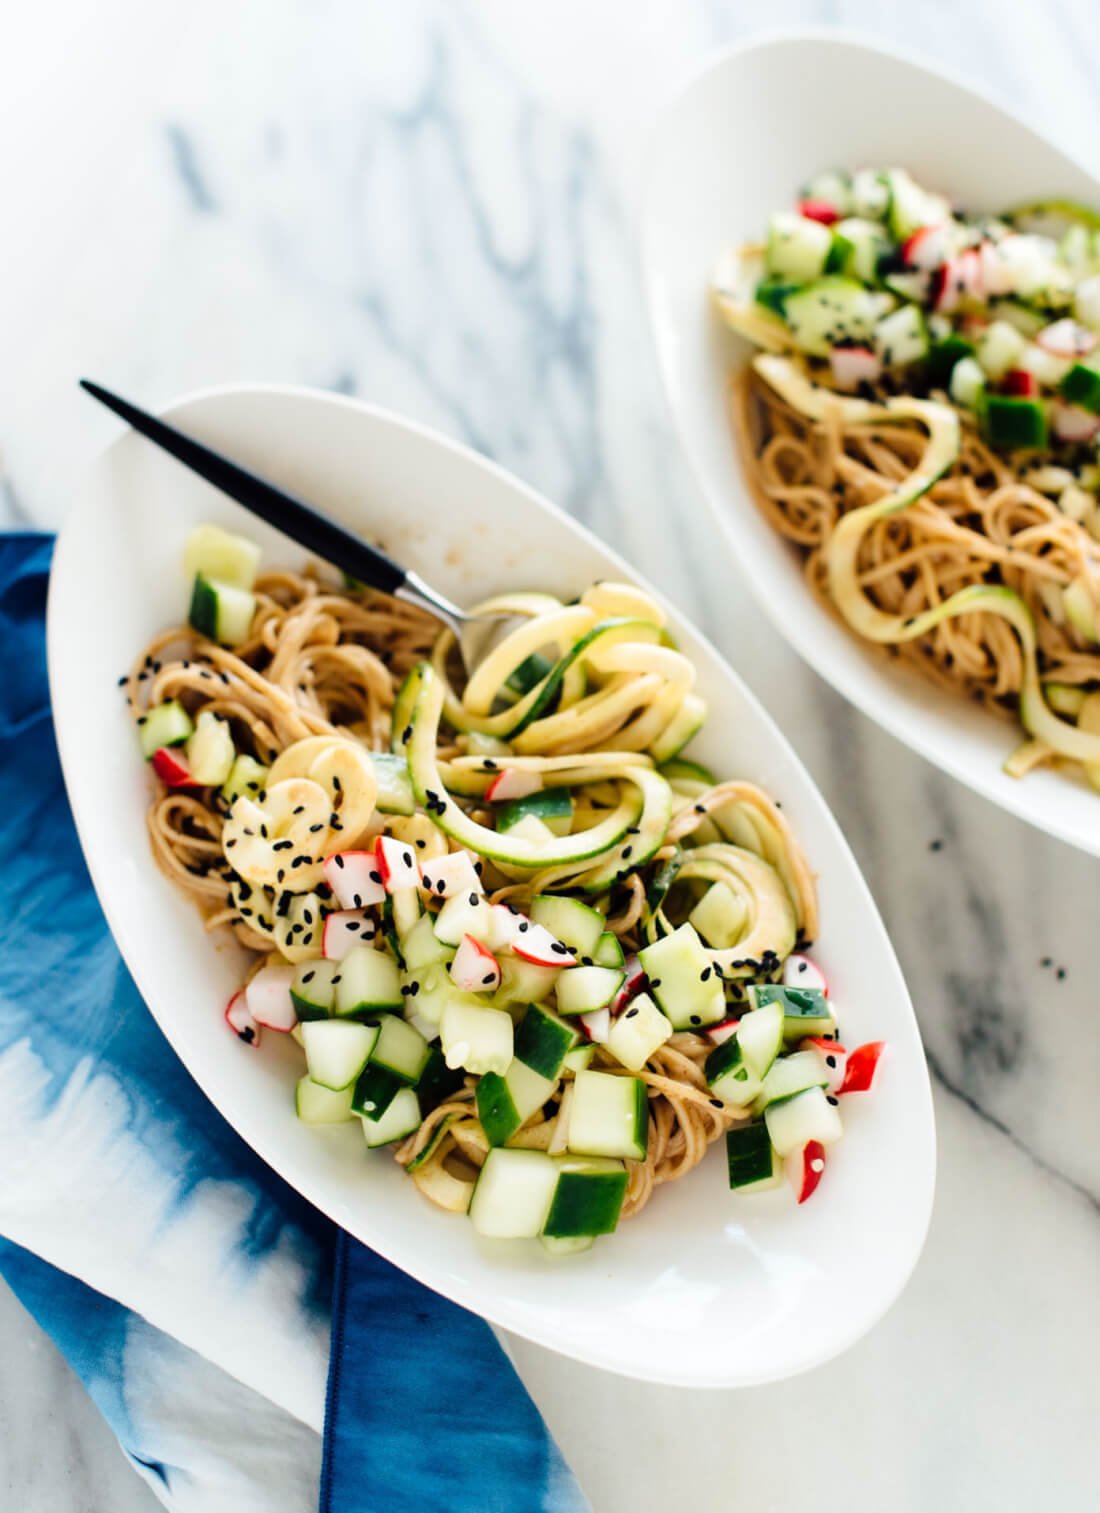 These almond-sesame soba zoodles make a light and refreshing dinner - cookieandkate.com